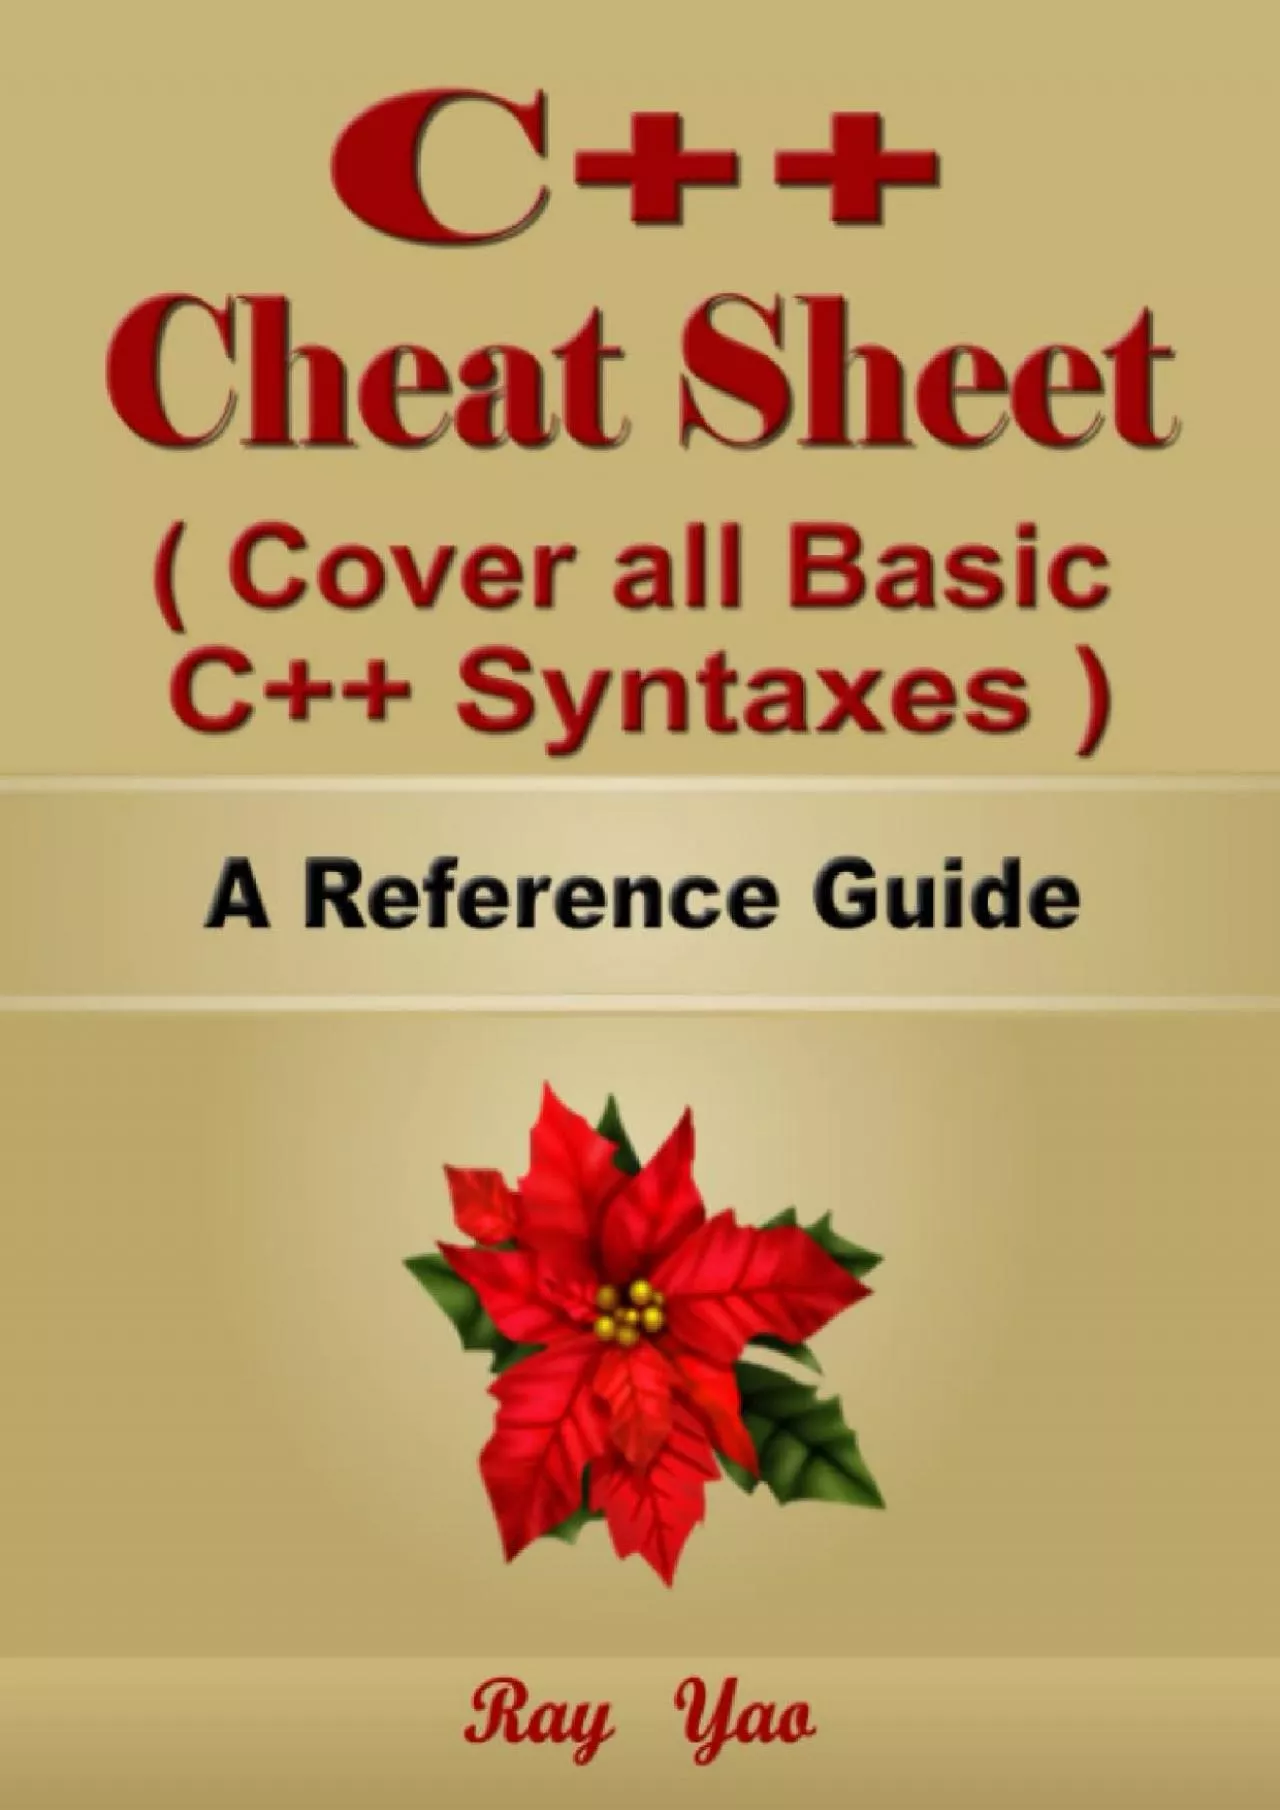 [eBOOK]-C++ Cheat Sheet, Cover all Basic Python Syntaxes, A Reference Guide C++ Programming